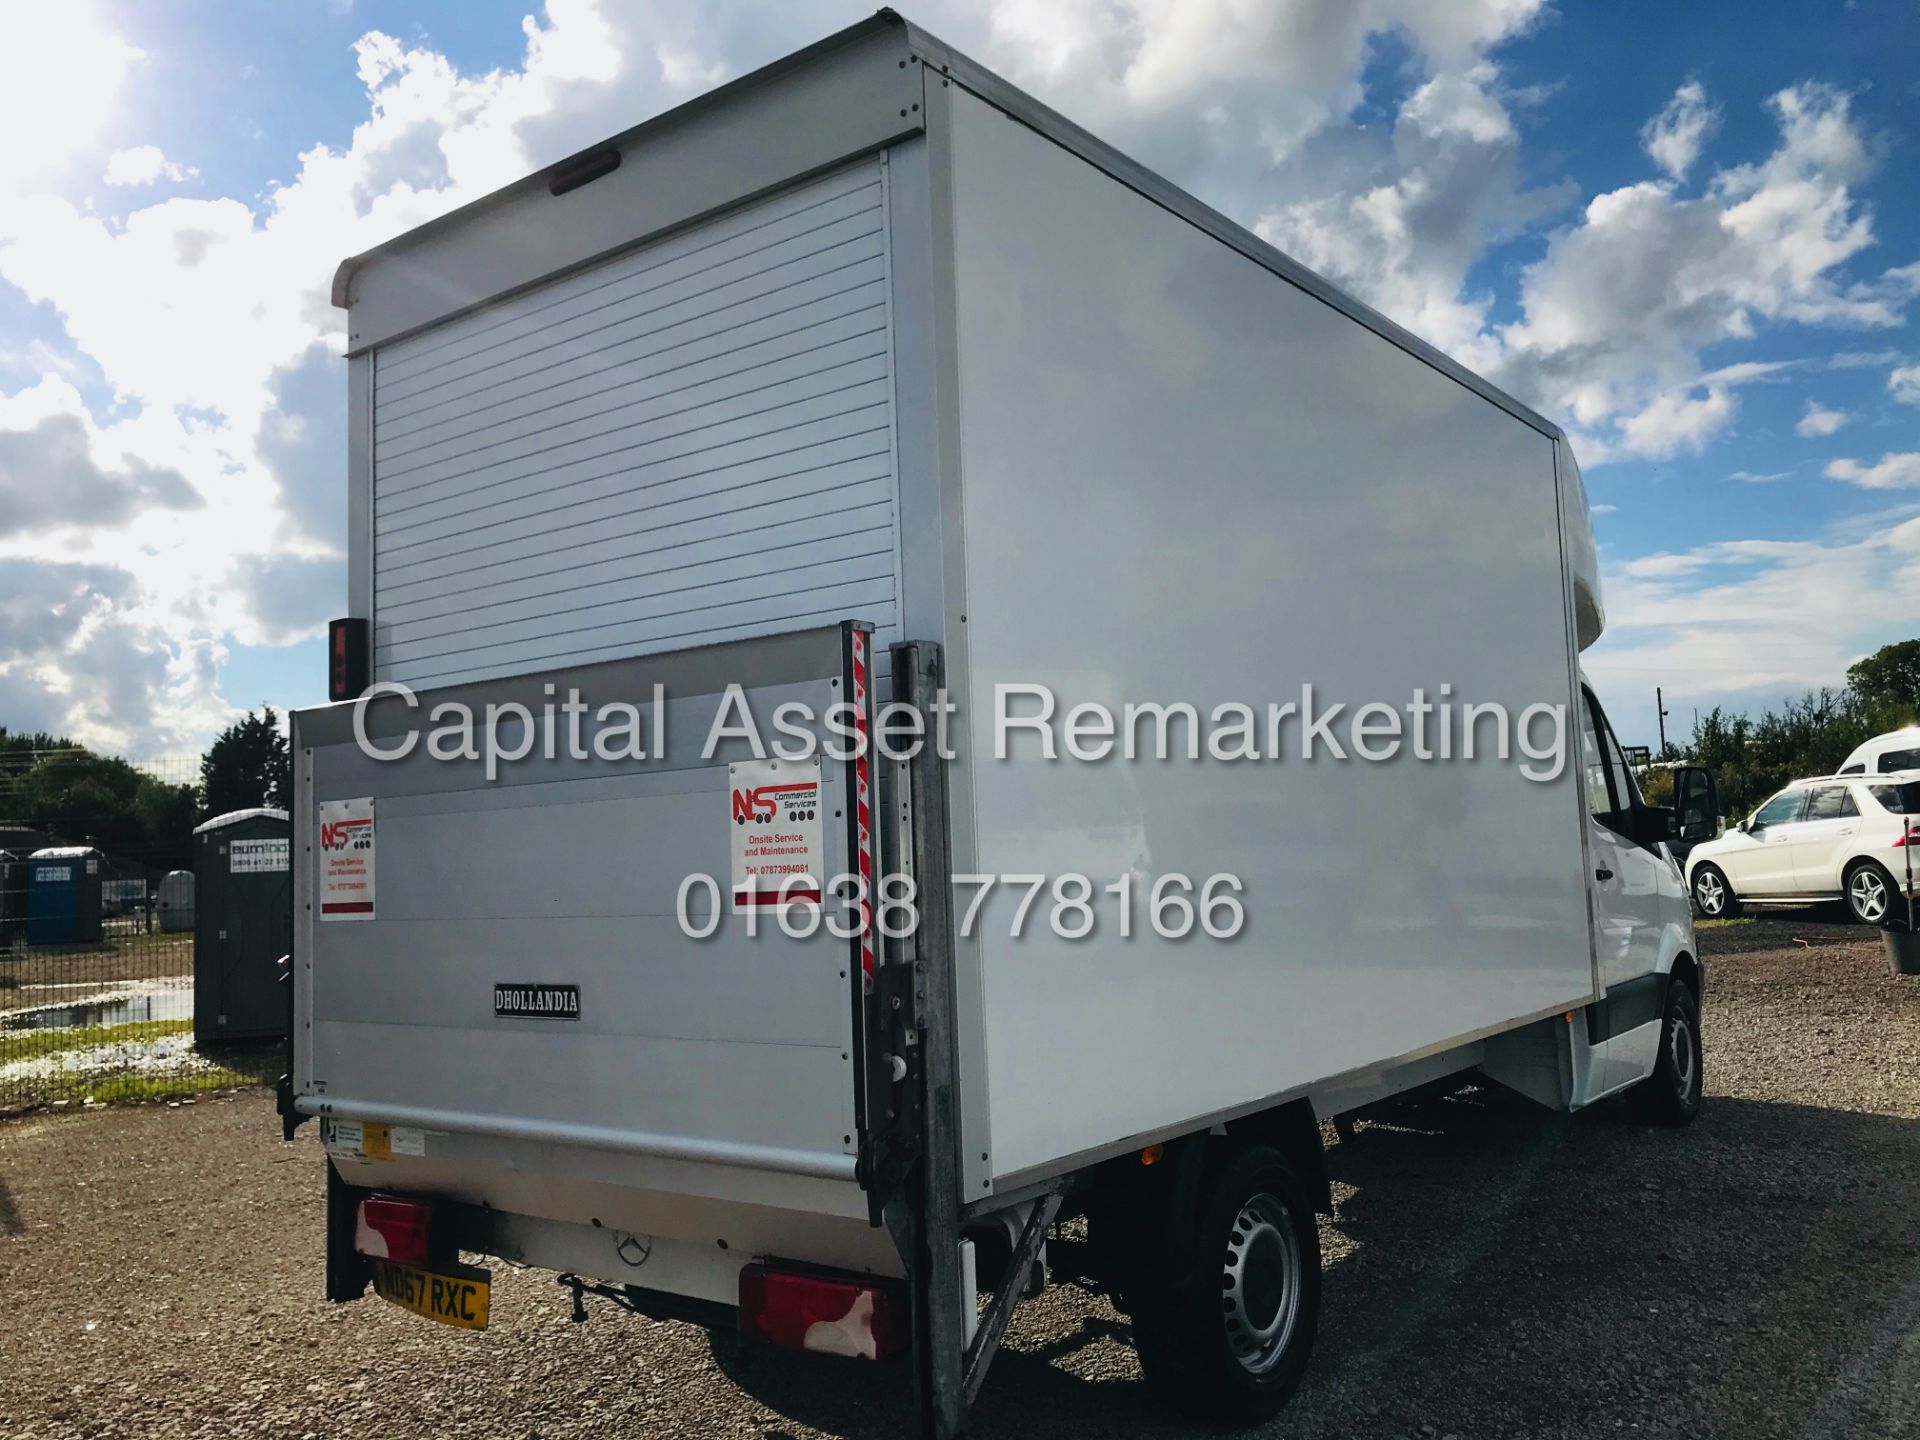 (ON SALE) MERCEDES SPRINTER 314CDI (2018 YEAR) 14FT LUTON TAIL-LIFT *1 OWNER FSH* EURO6 / ULEZ - Image 9 of 25